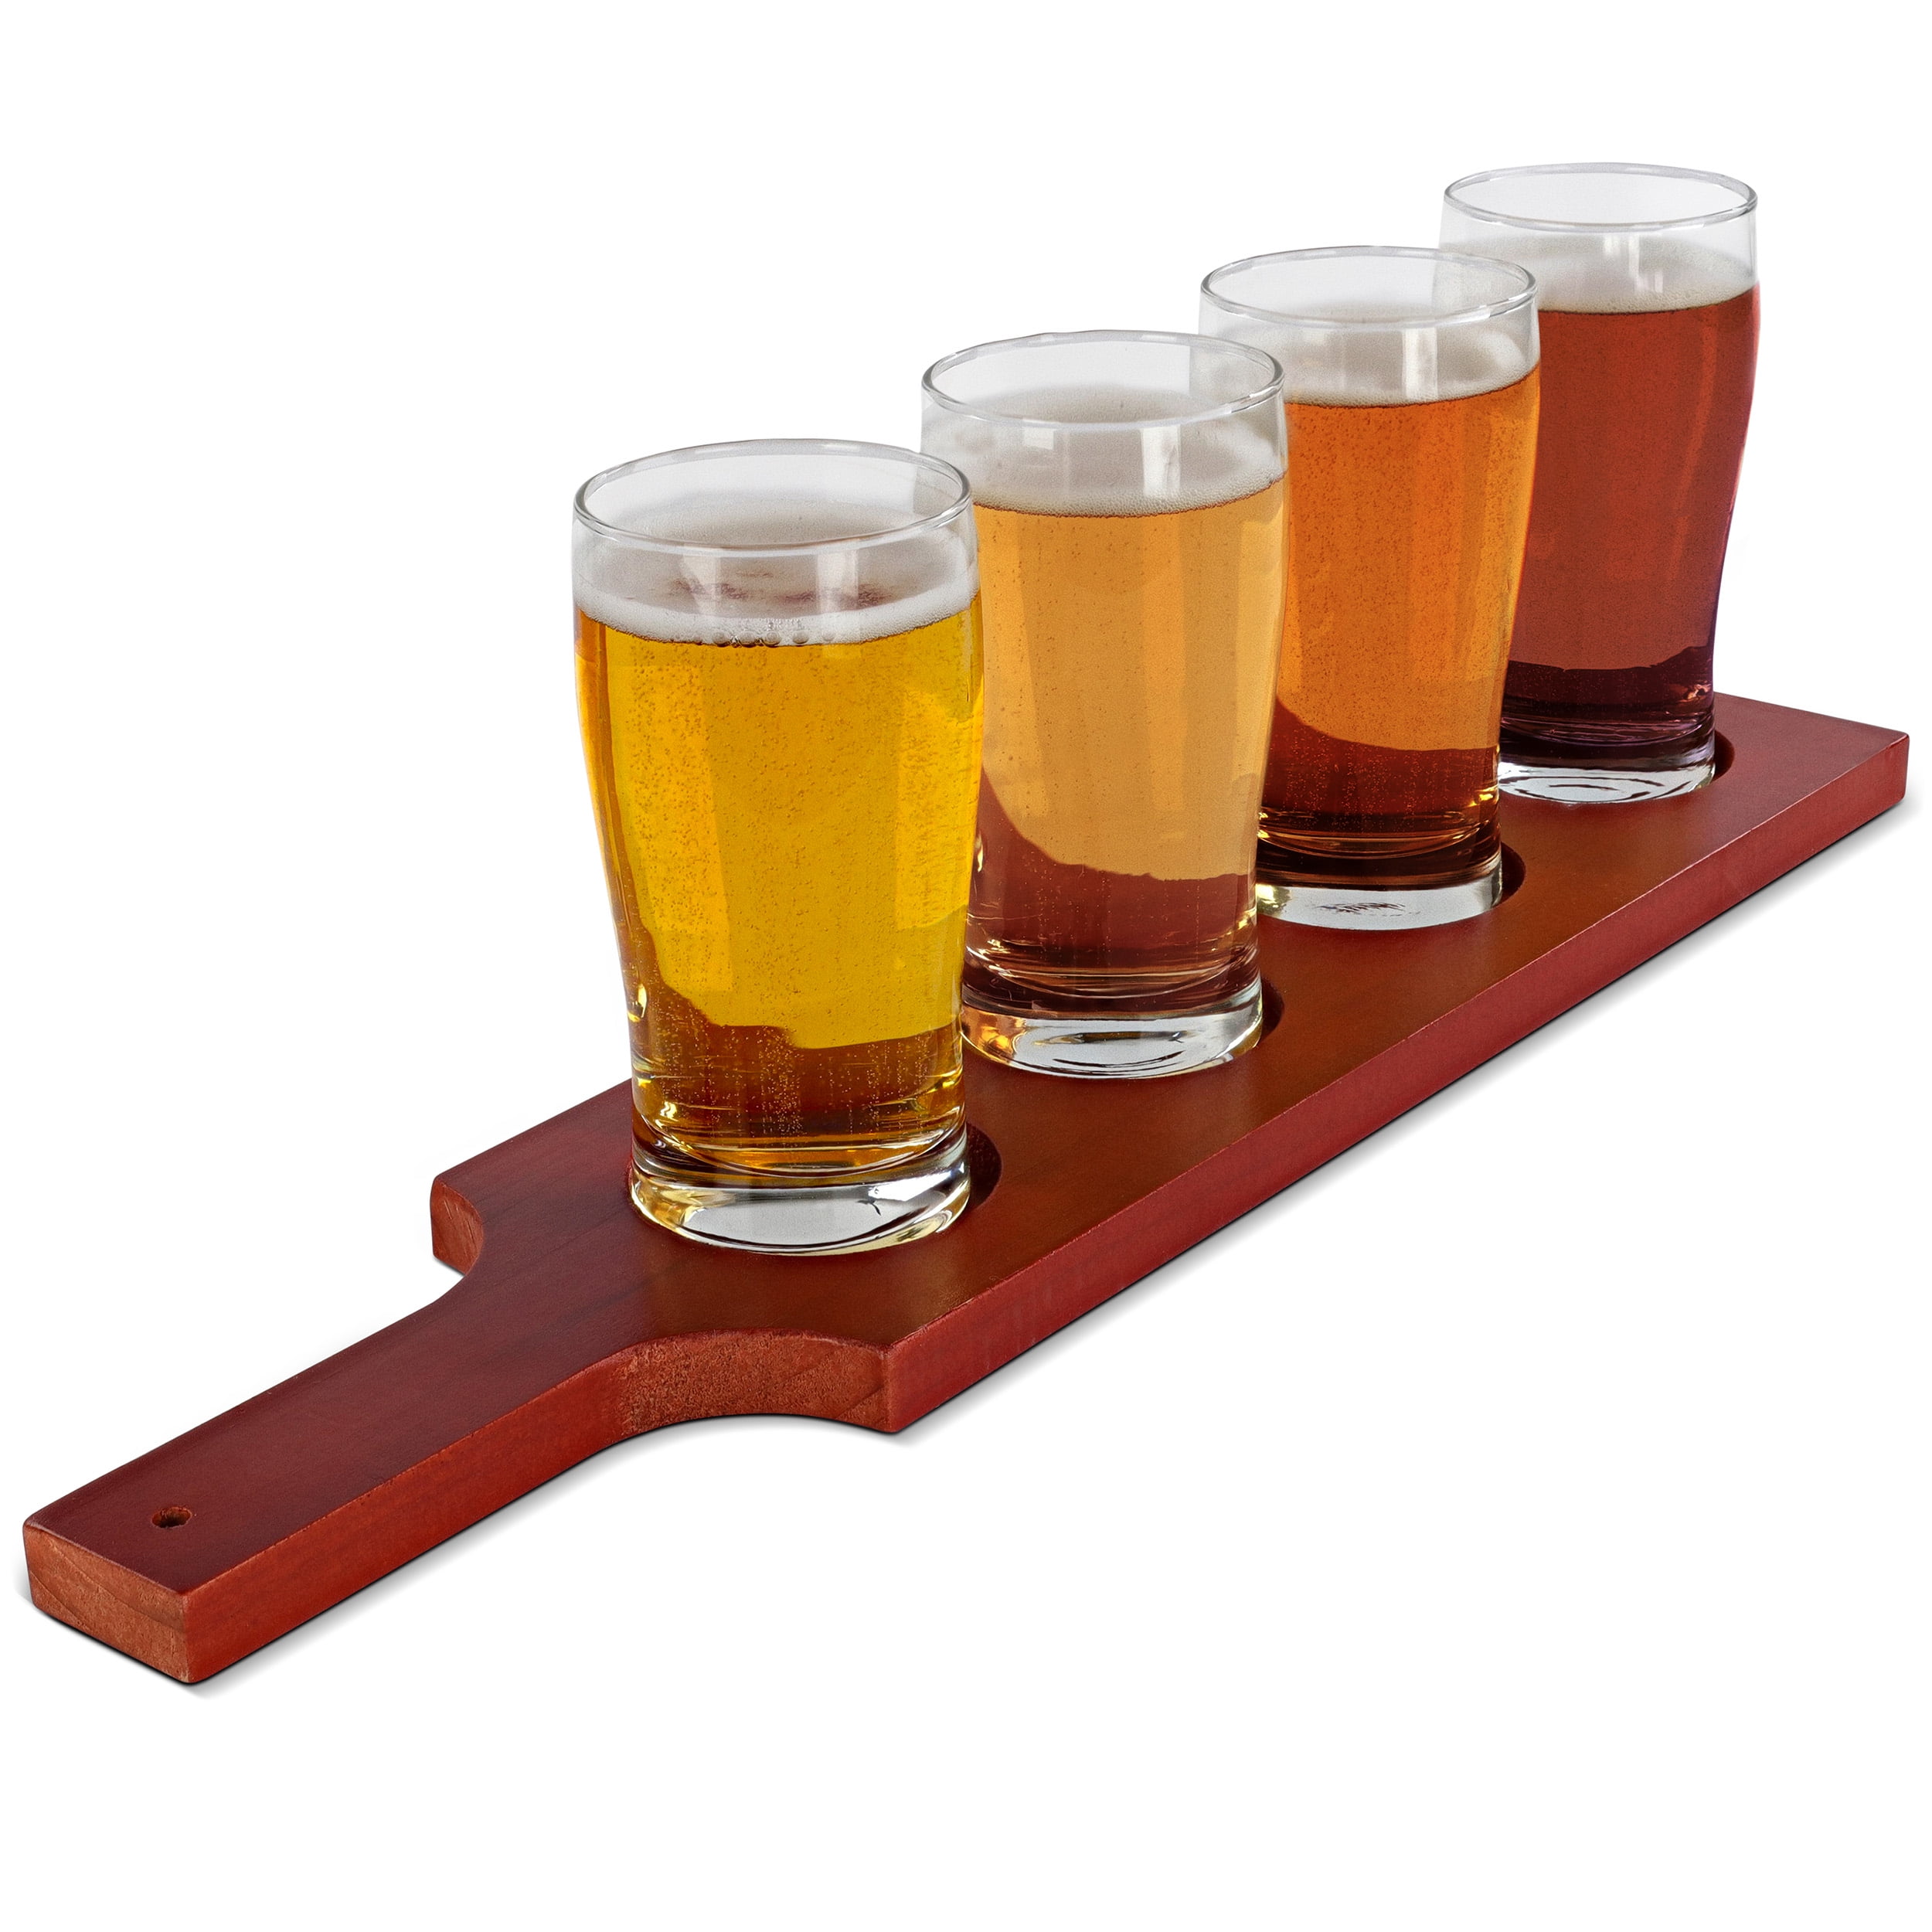 5 oz Beer Tasting Glasses, Beer Paddle Glasses, Small Beer Glass - 2 1/2 x  2 1/2 x 3 3/4 - 6 count box - Restaurantware